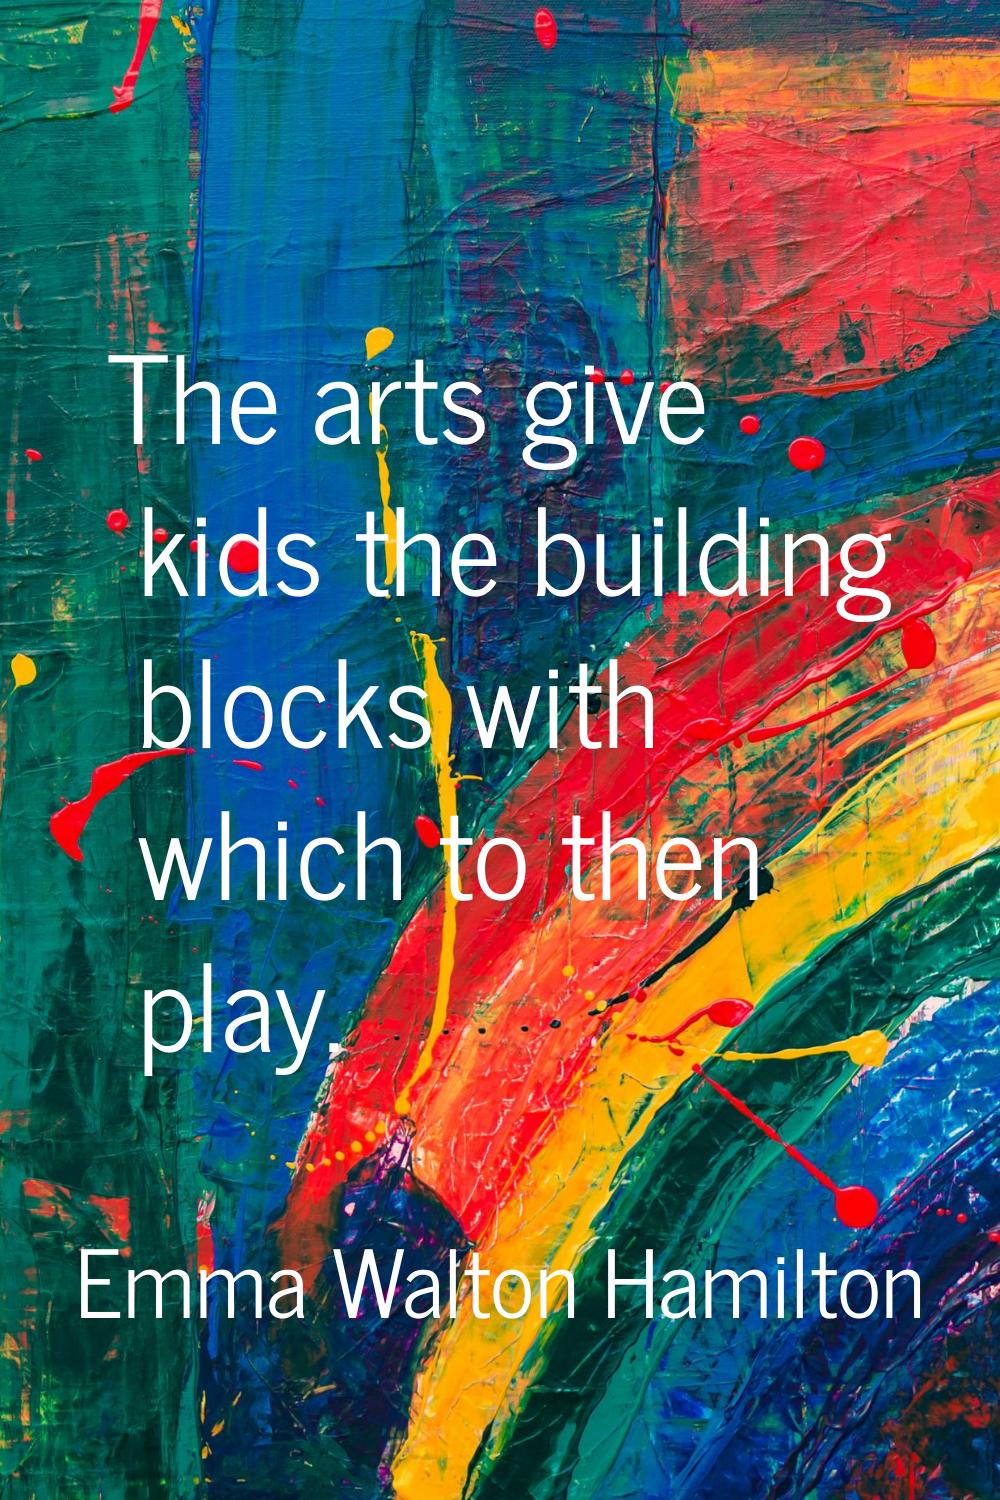 The arts give kids the building blocks with which to then play.